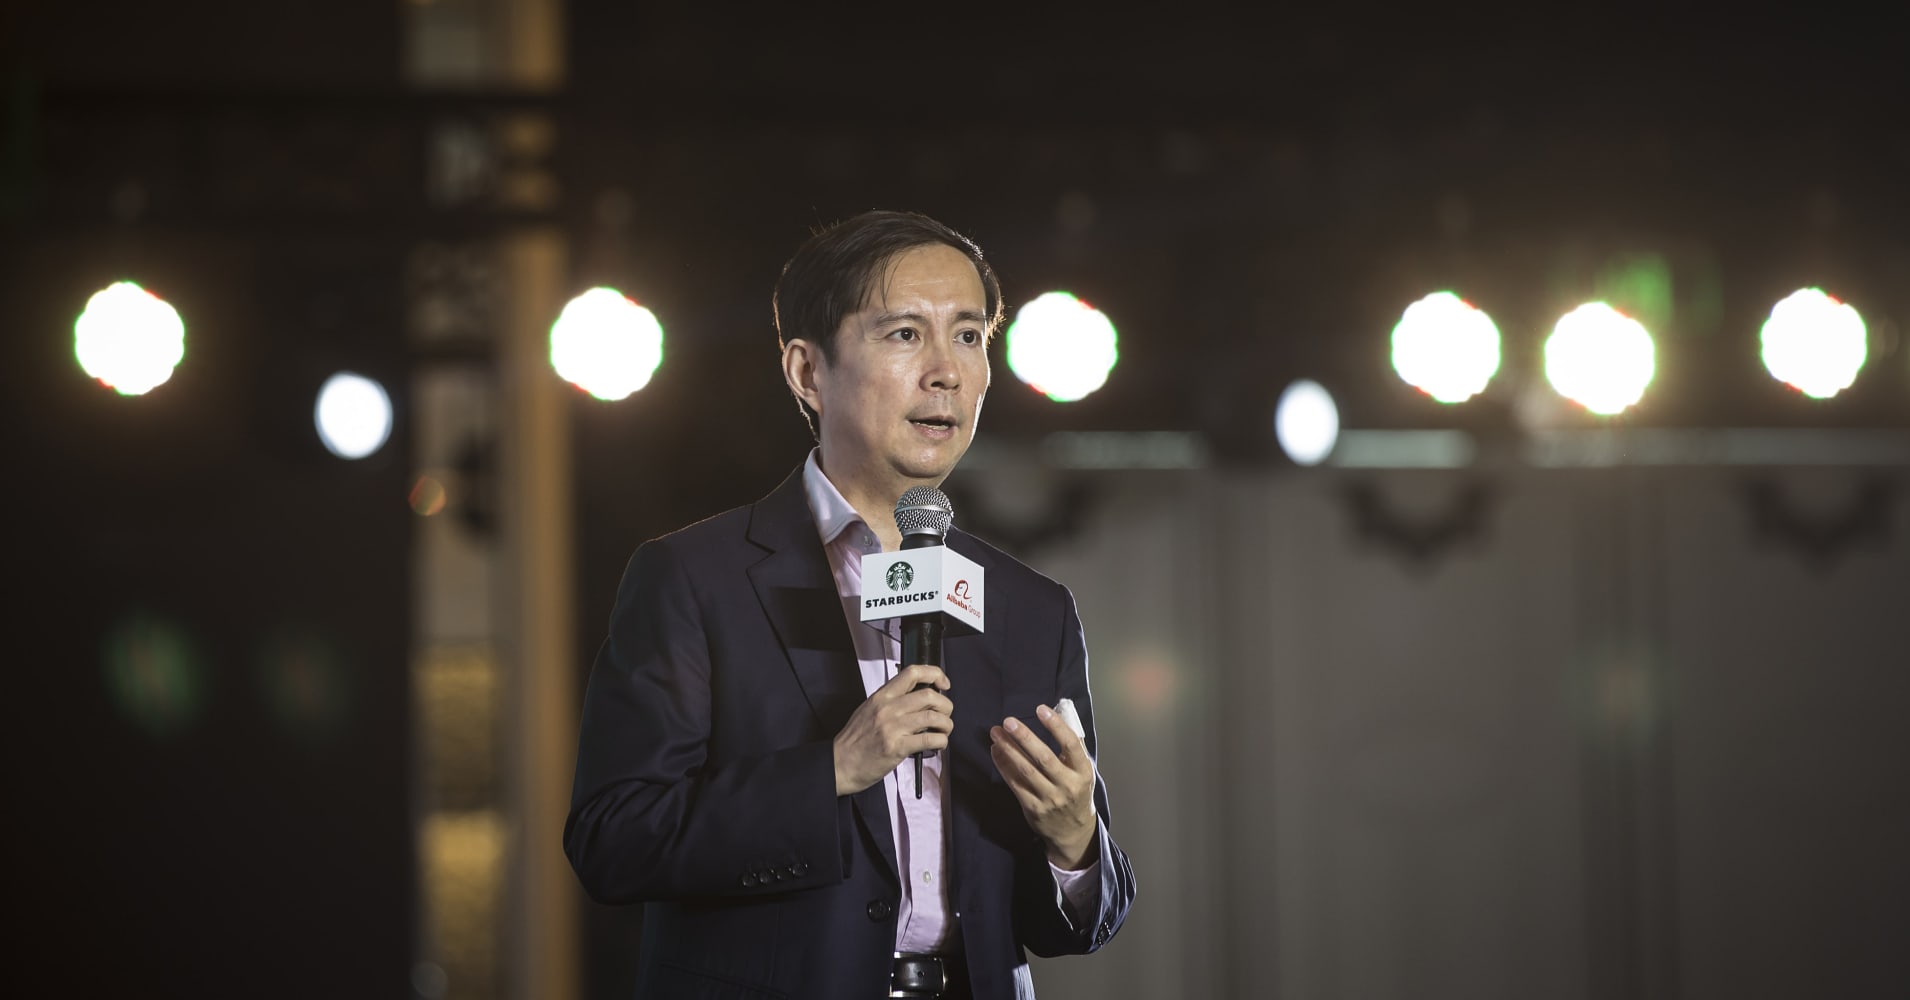 Daniel Zhang, chief executive officer of Alibaba Group Holding Ltd., speaks during a news conference in Shanghai, China.